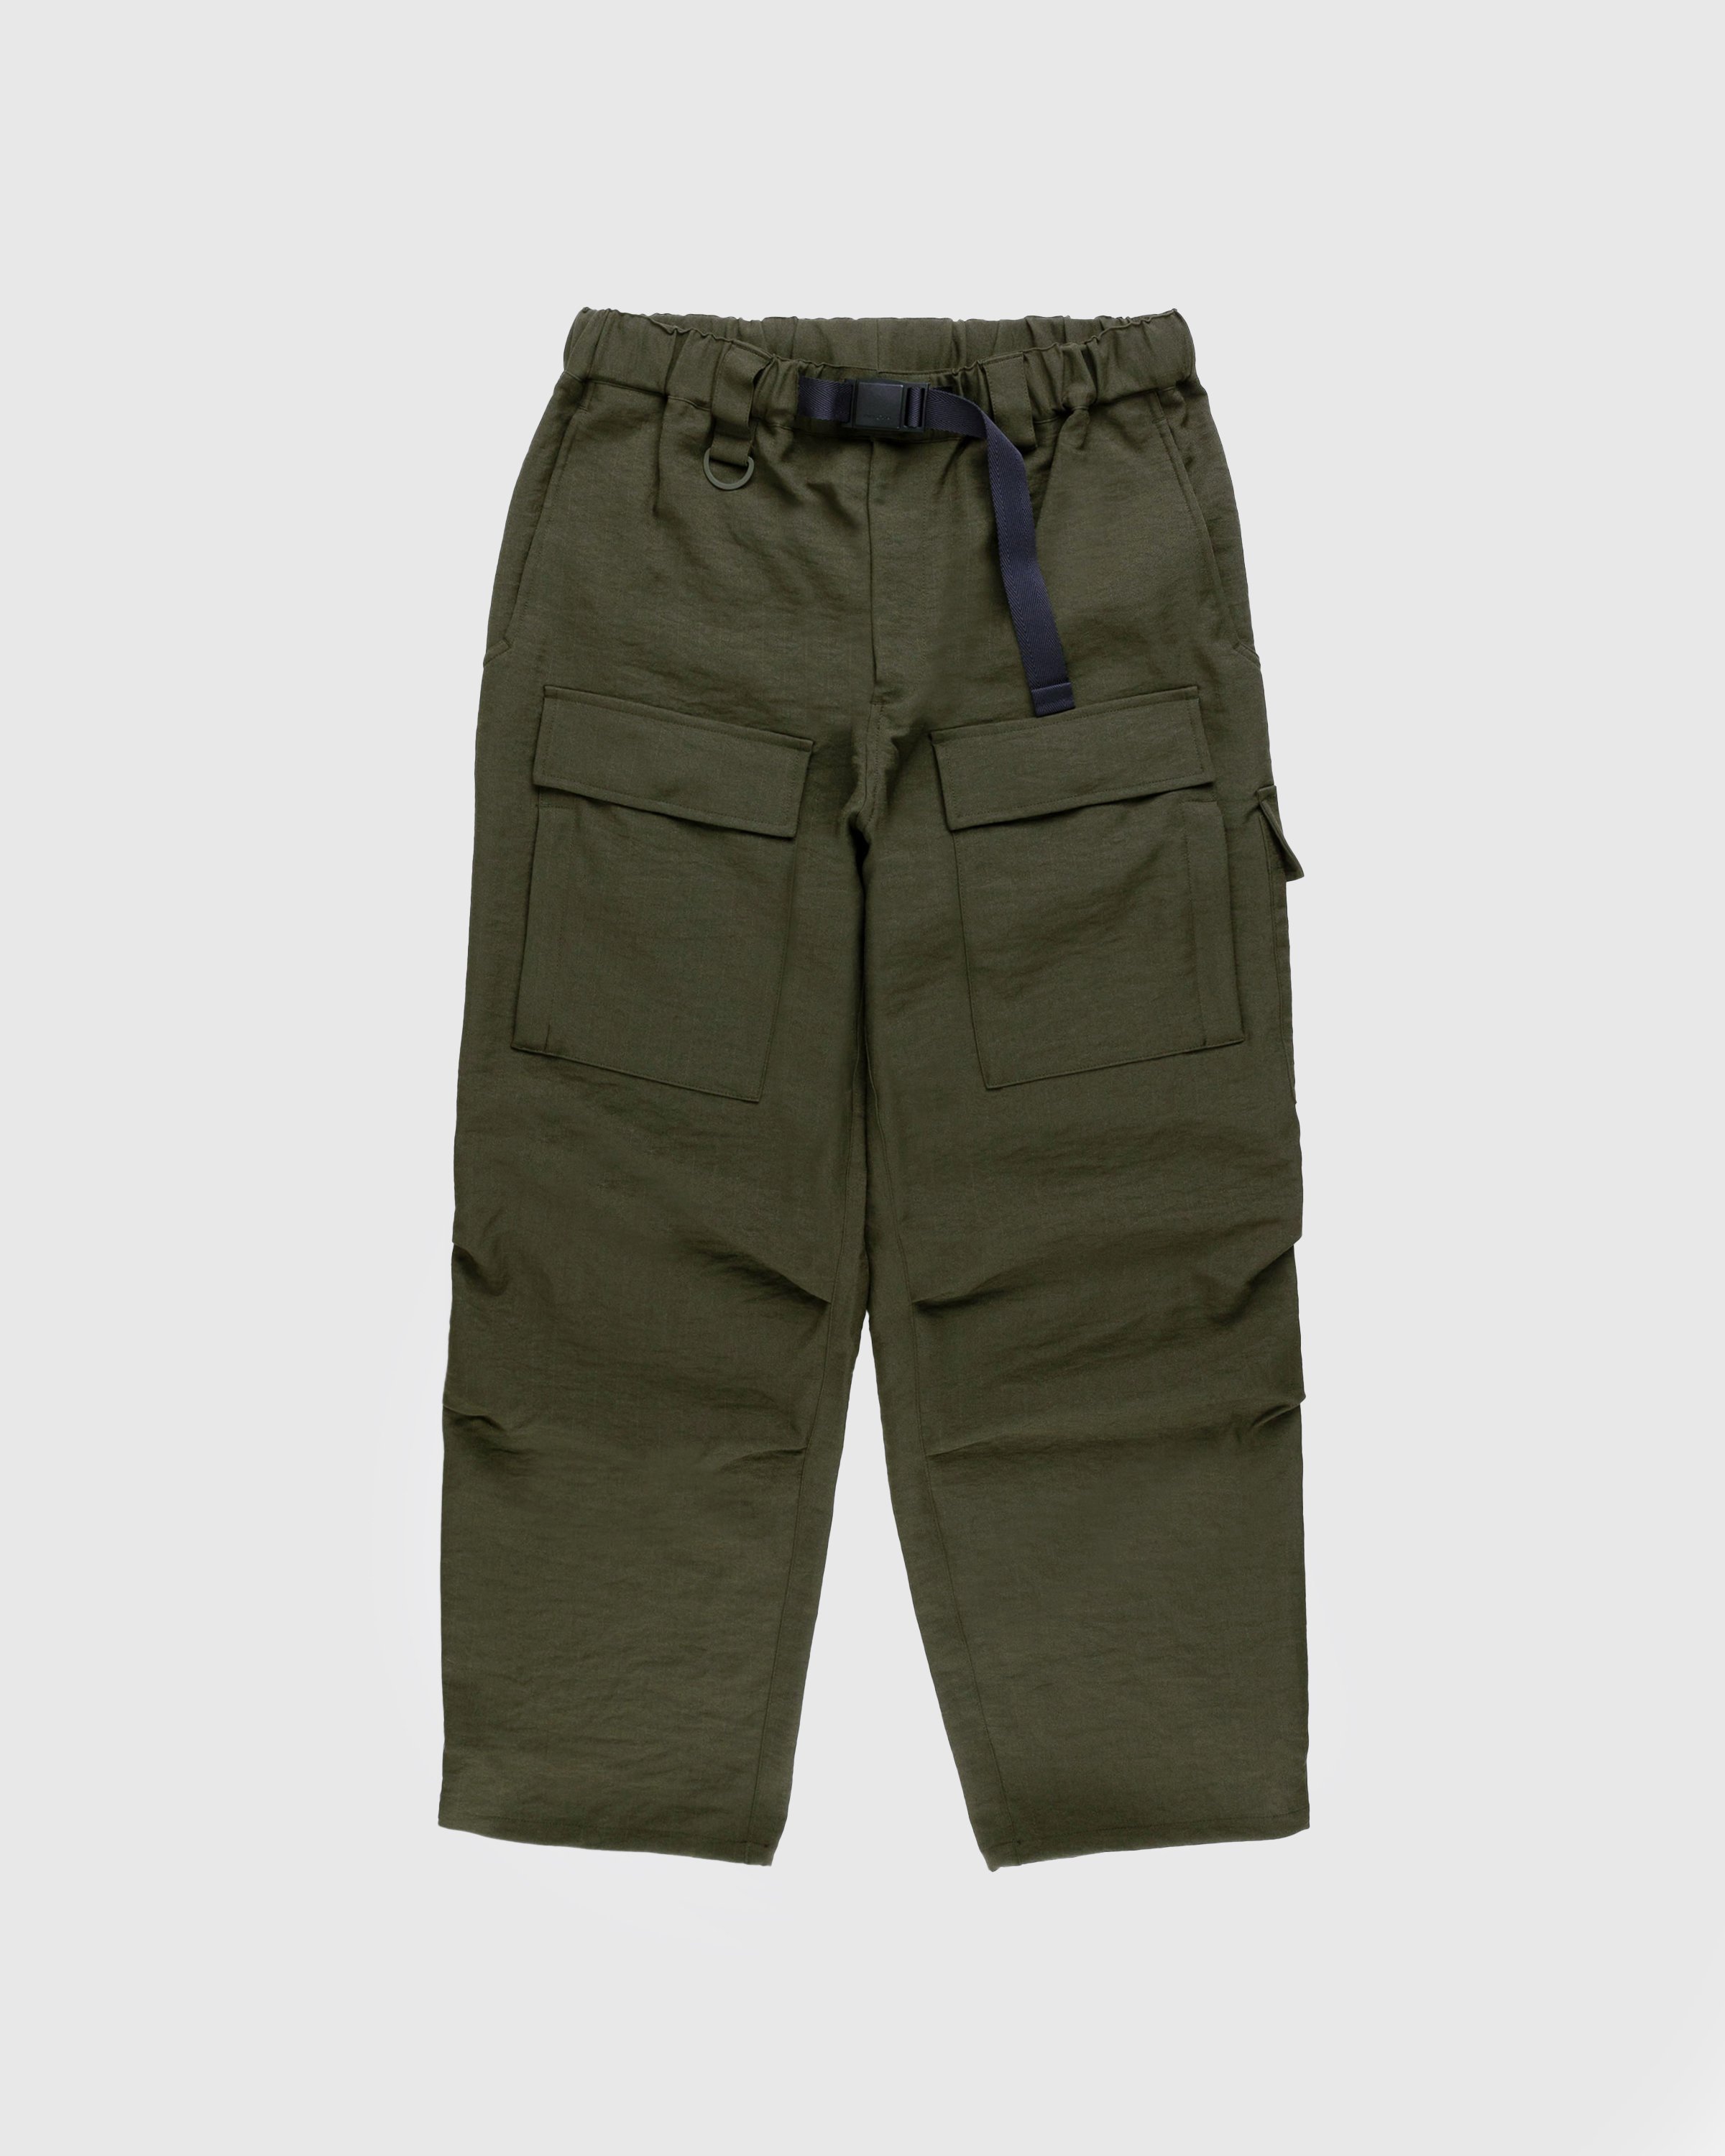 Y-3 - CL SL Cargo Pants - Clothing - Green - Image 1